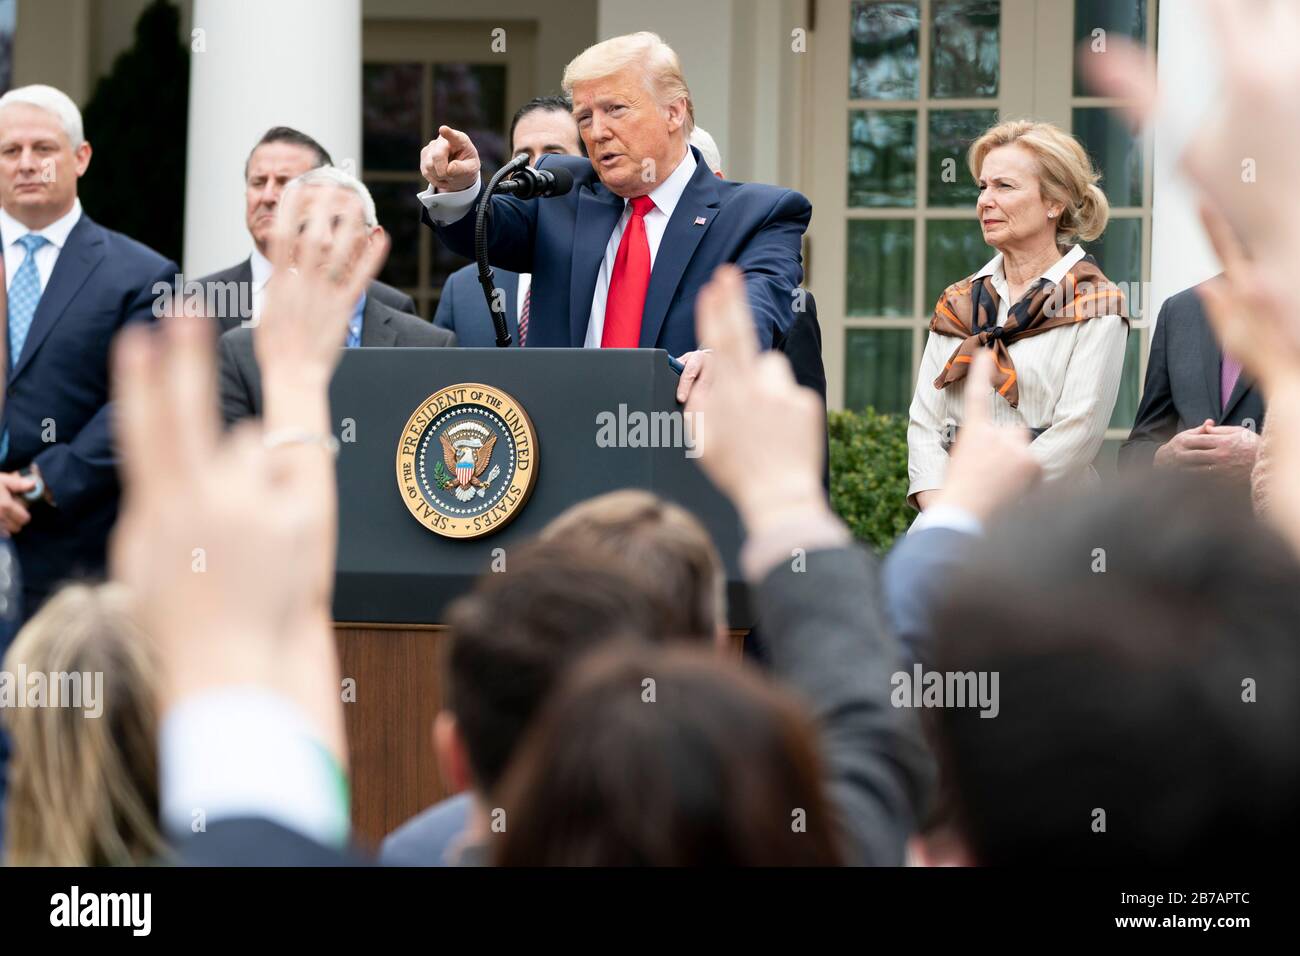 Washington, United States Of America. 13th Mar, 2020. Washington, United States of America. 13 March, 2020. U.S President Donald Trump takes a question after declaring a national emergency to combat the coronavirus outbreak in the Rose Garden of the White House March 13, 2020 in Washington, DC. Credit: Shealah Craighead/White House Photo/Alamy Live News Stock Photo